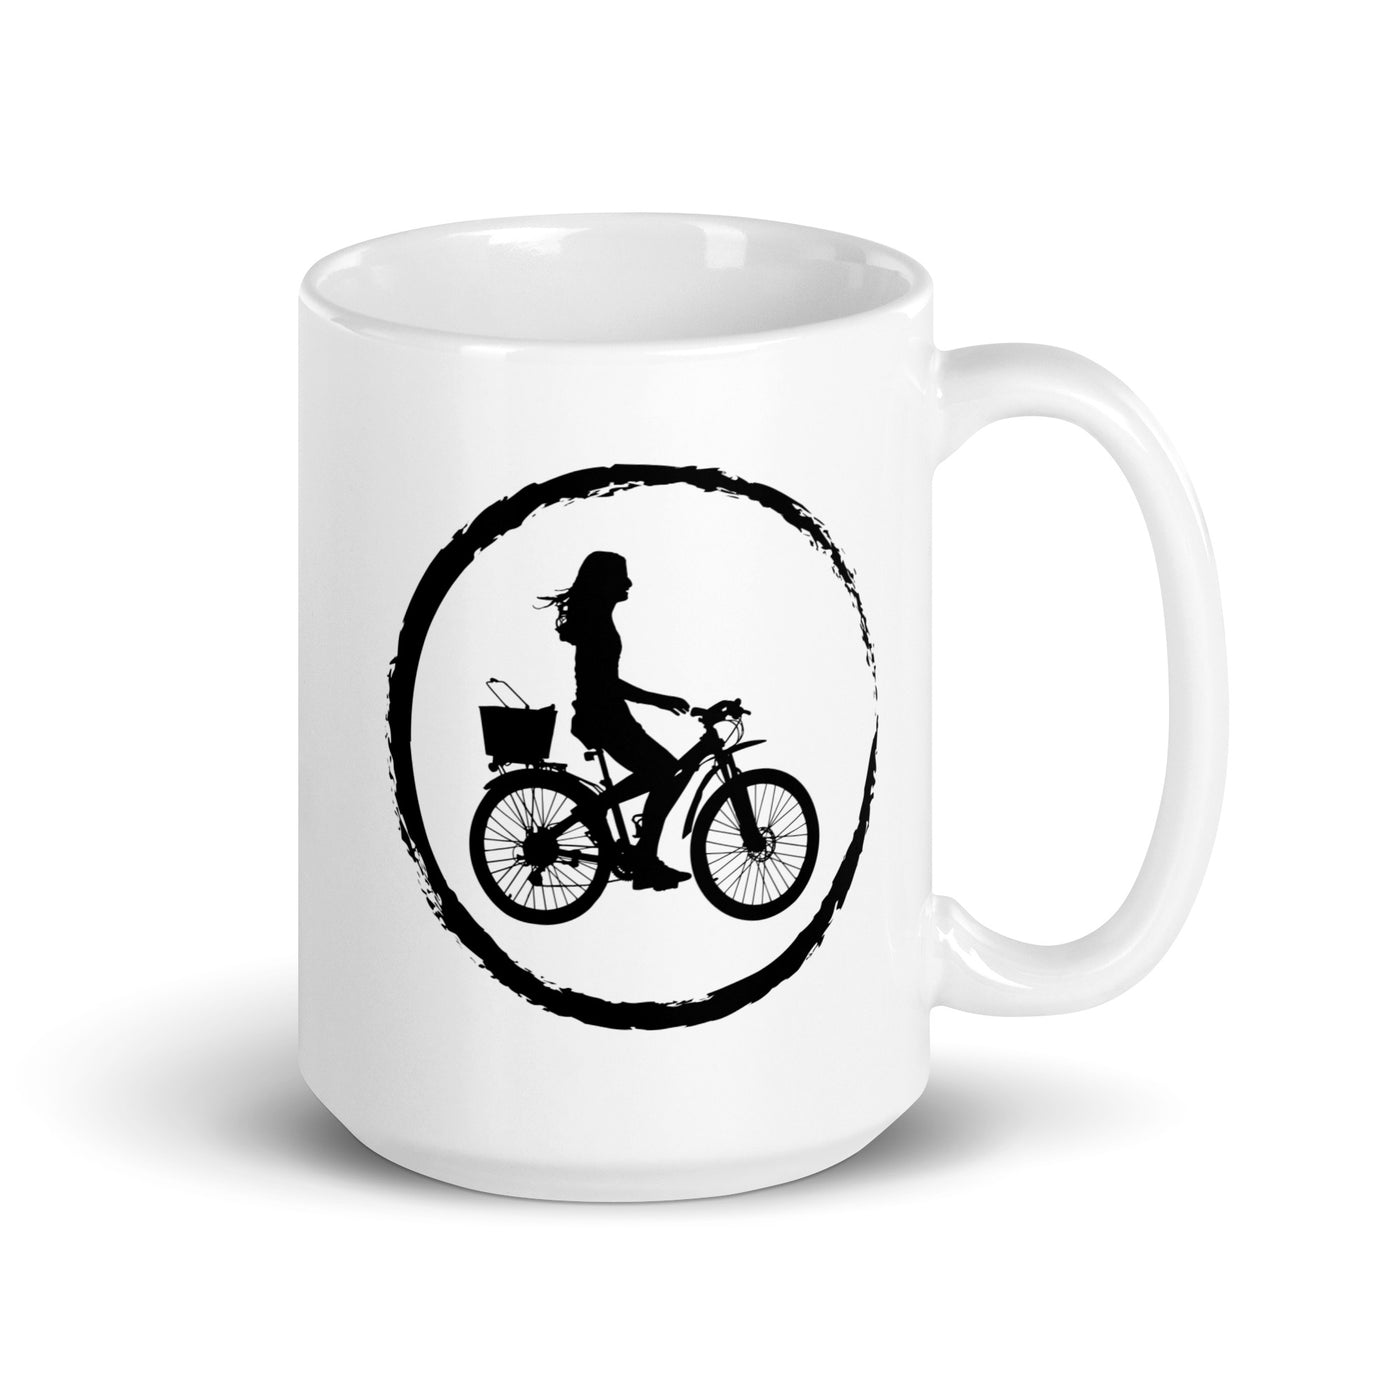 Cricle And Cycling - Tasse fahrrad 15oz